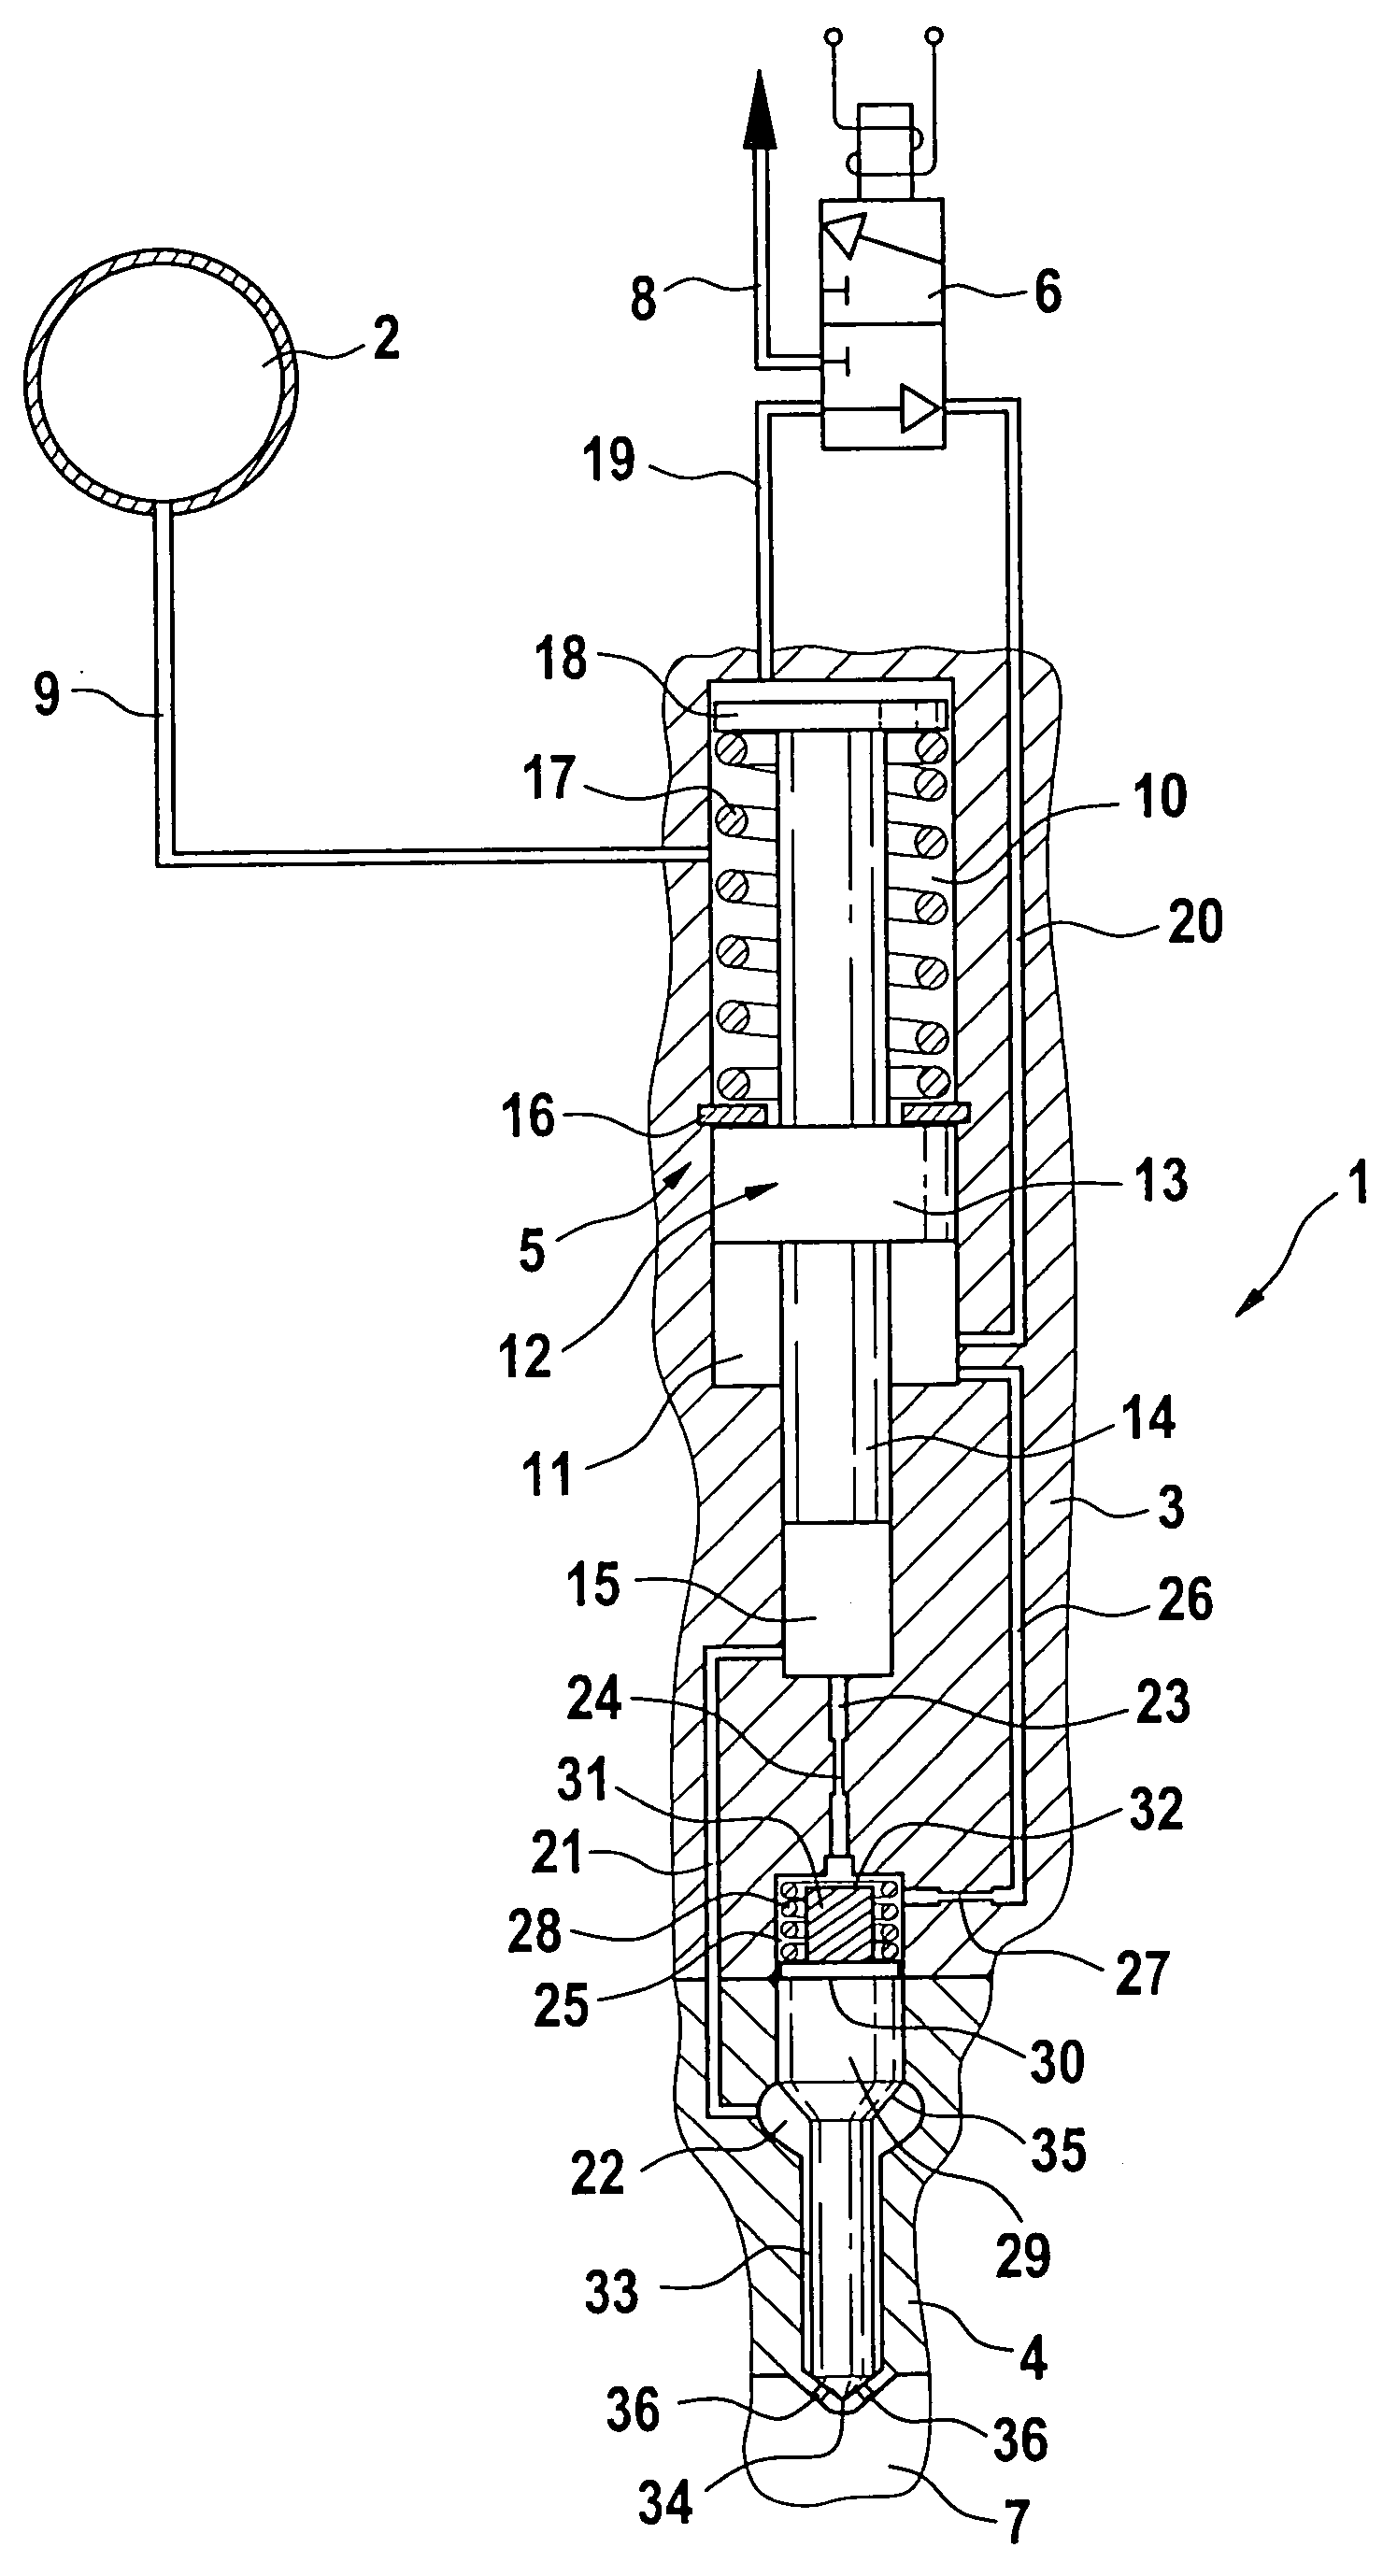 Device for damping the needle lift in fuel injectors